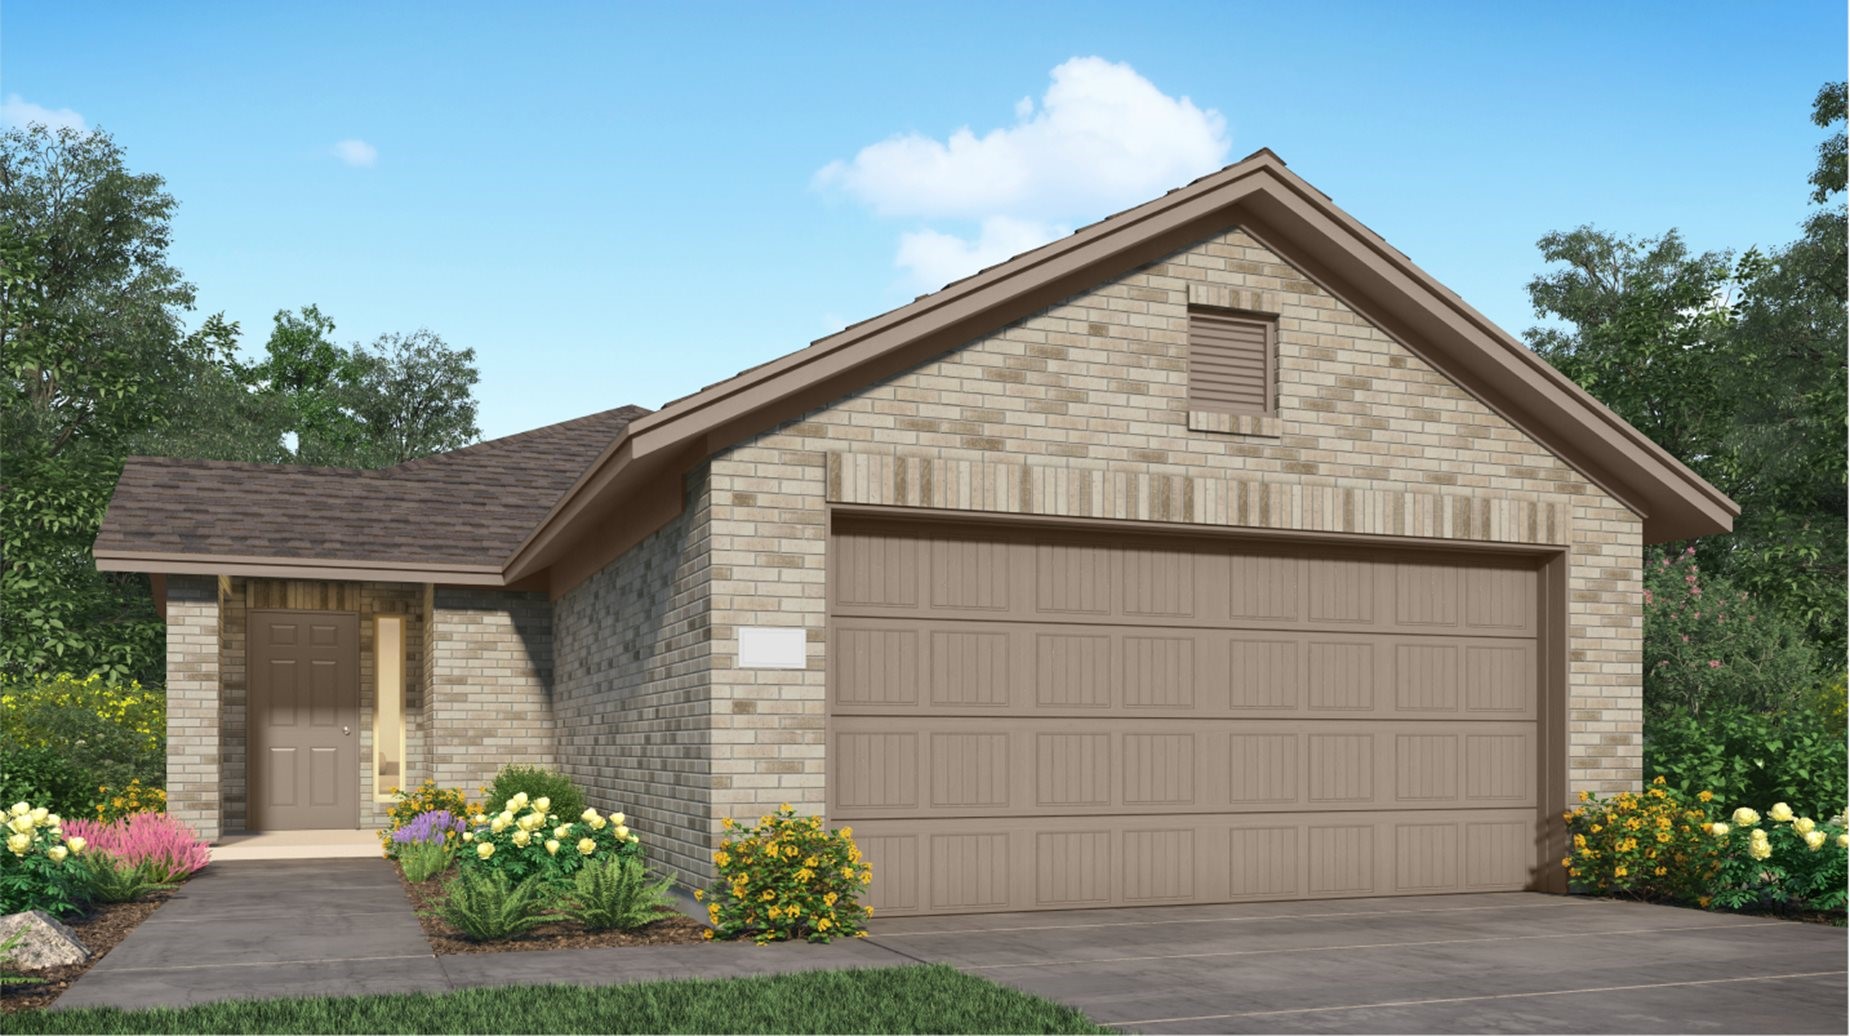 The Brook II A by Lennar in Ladera Trails.